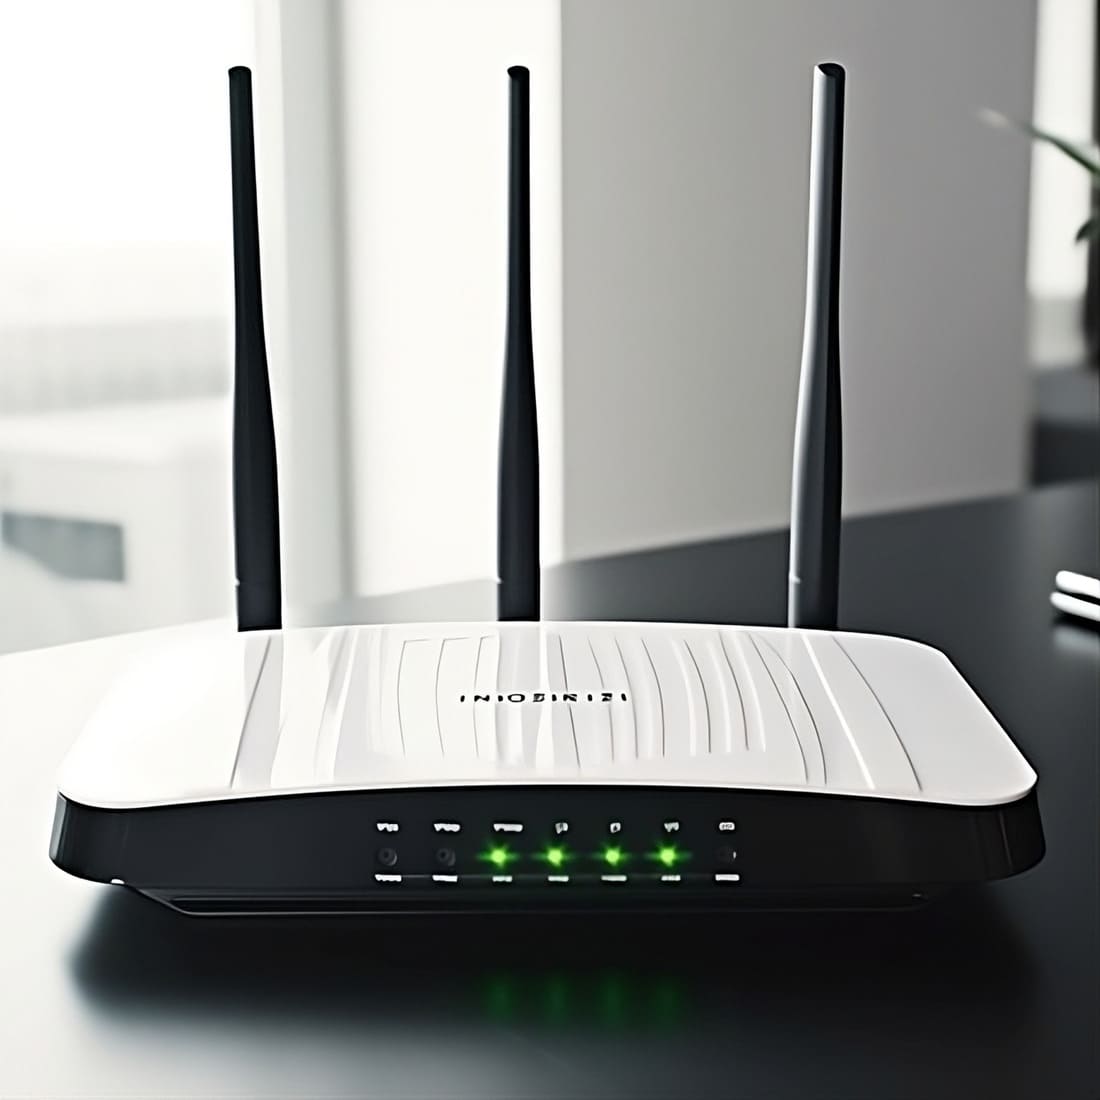 How to Delete Automatic Wi-Fi Connection